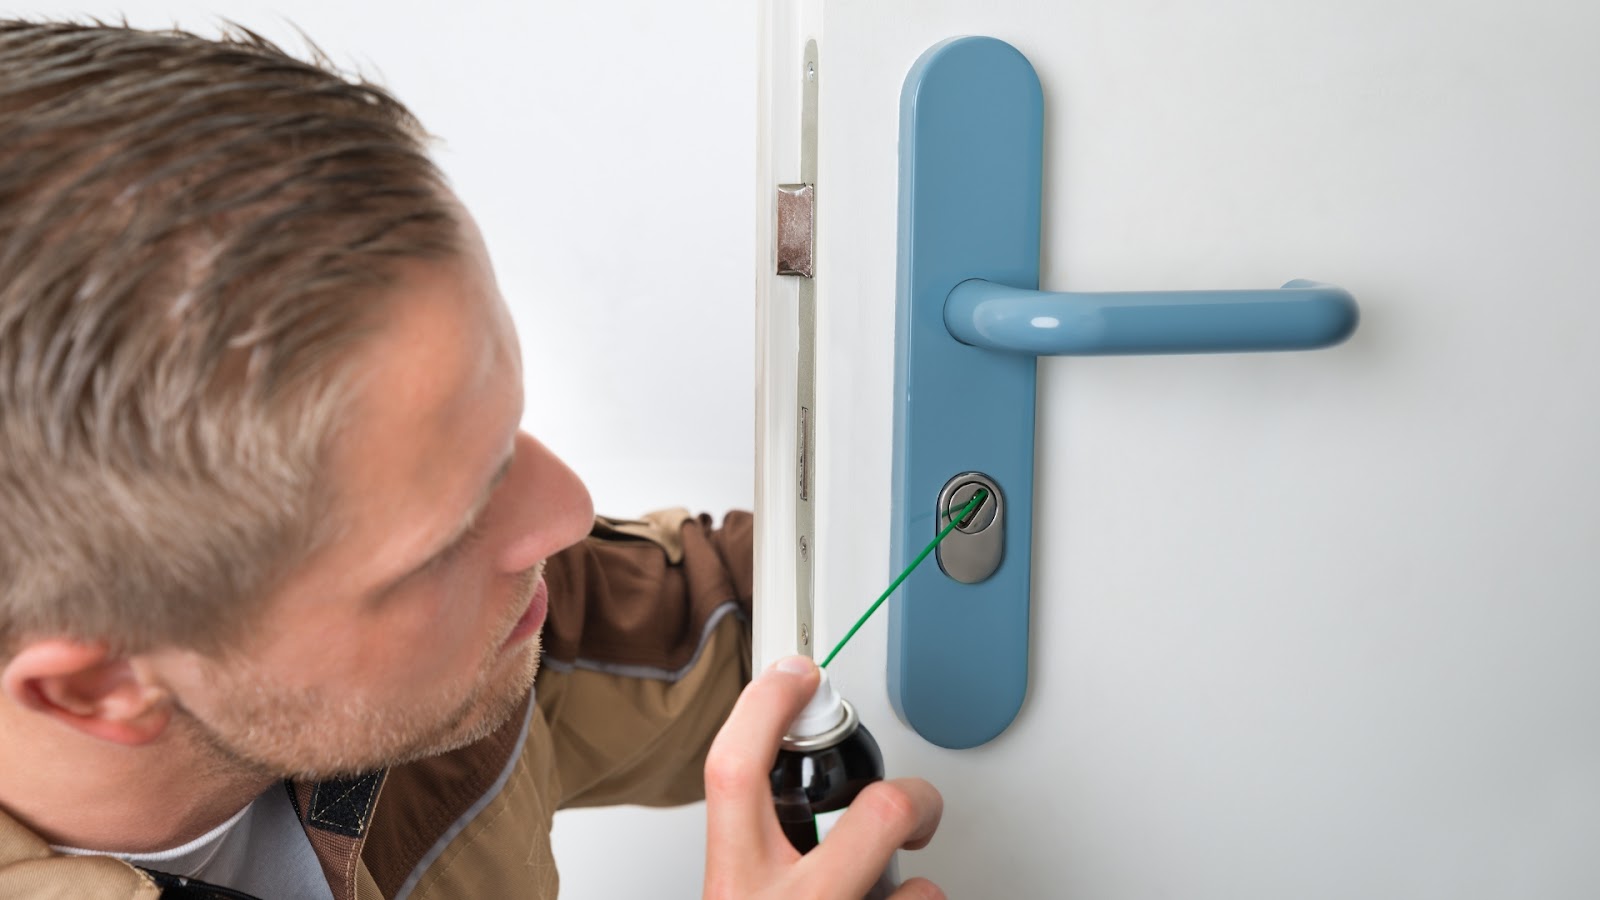 A locksmith applies lubricant to the keyhole of a front door lock to ensure smooth operation.